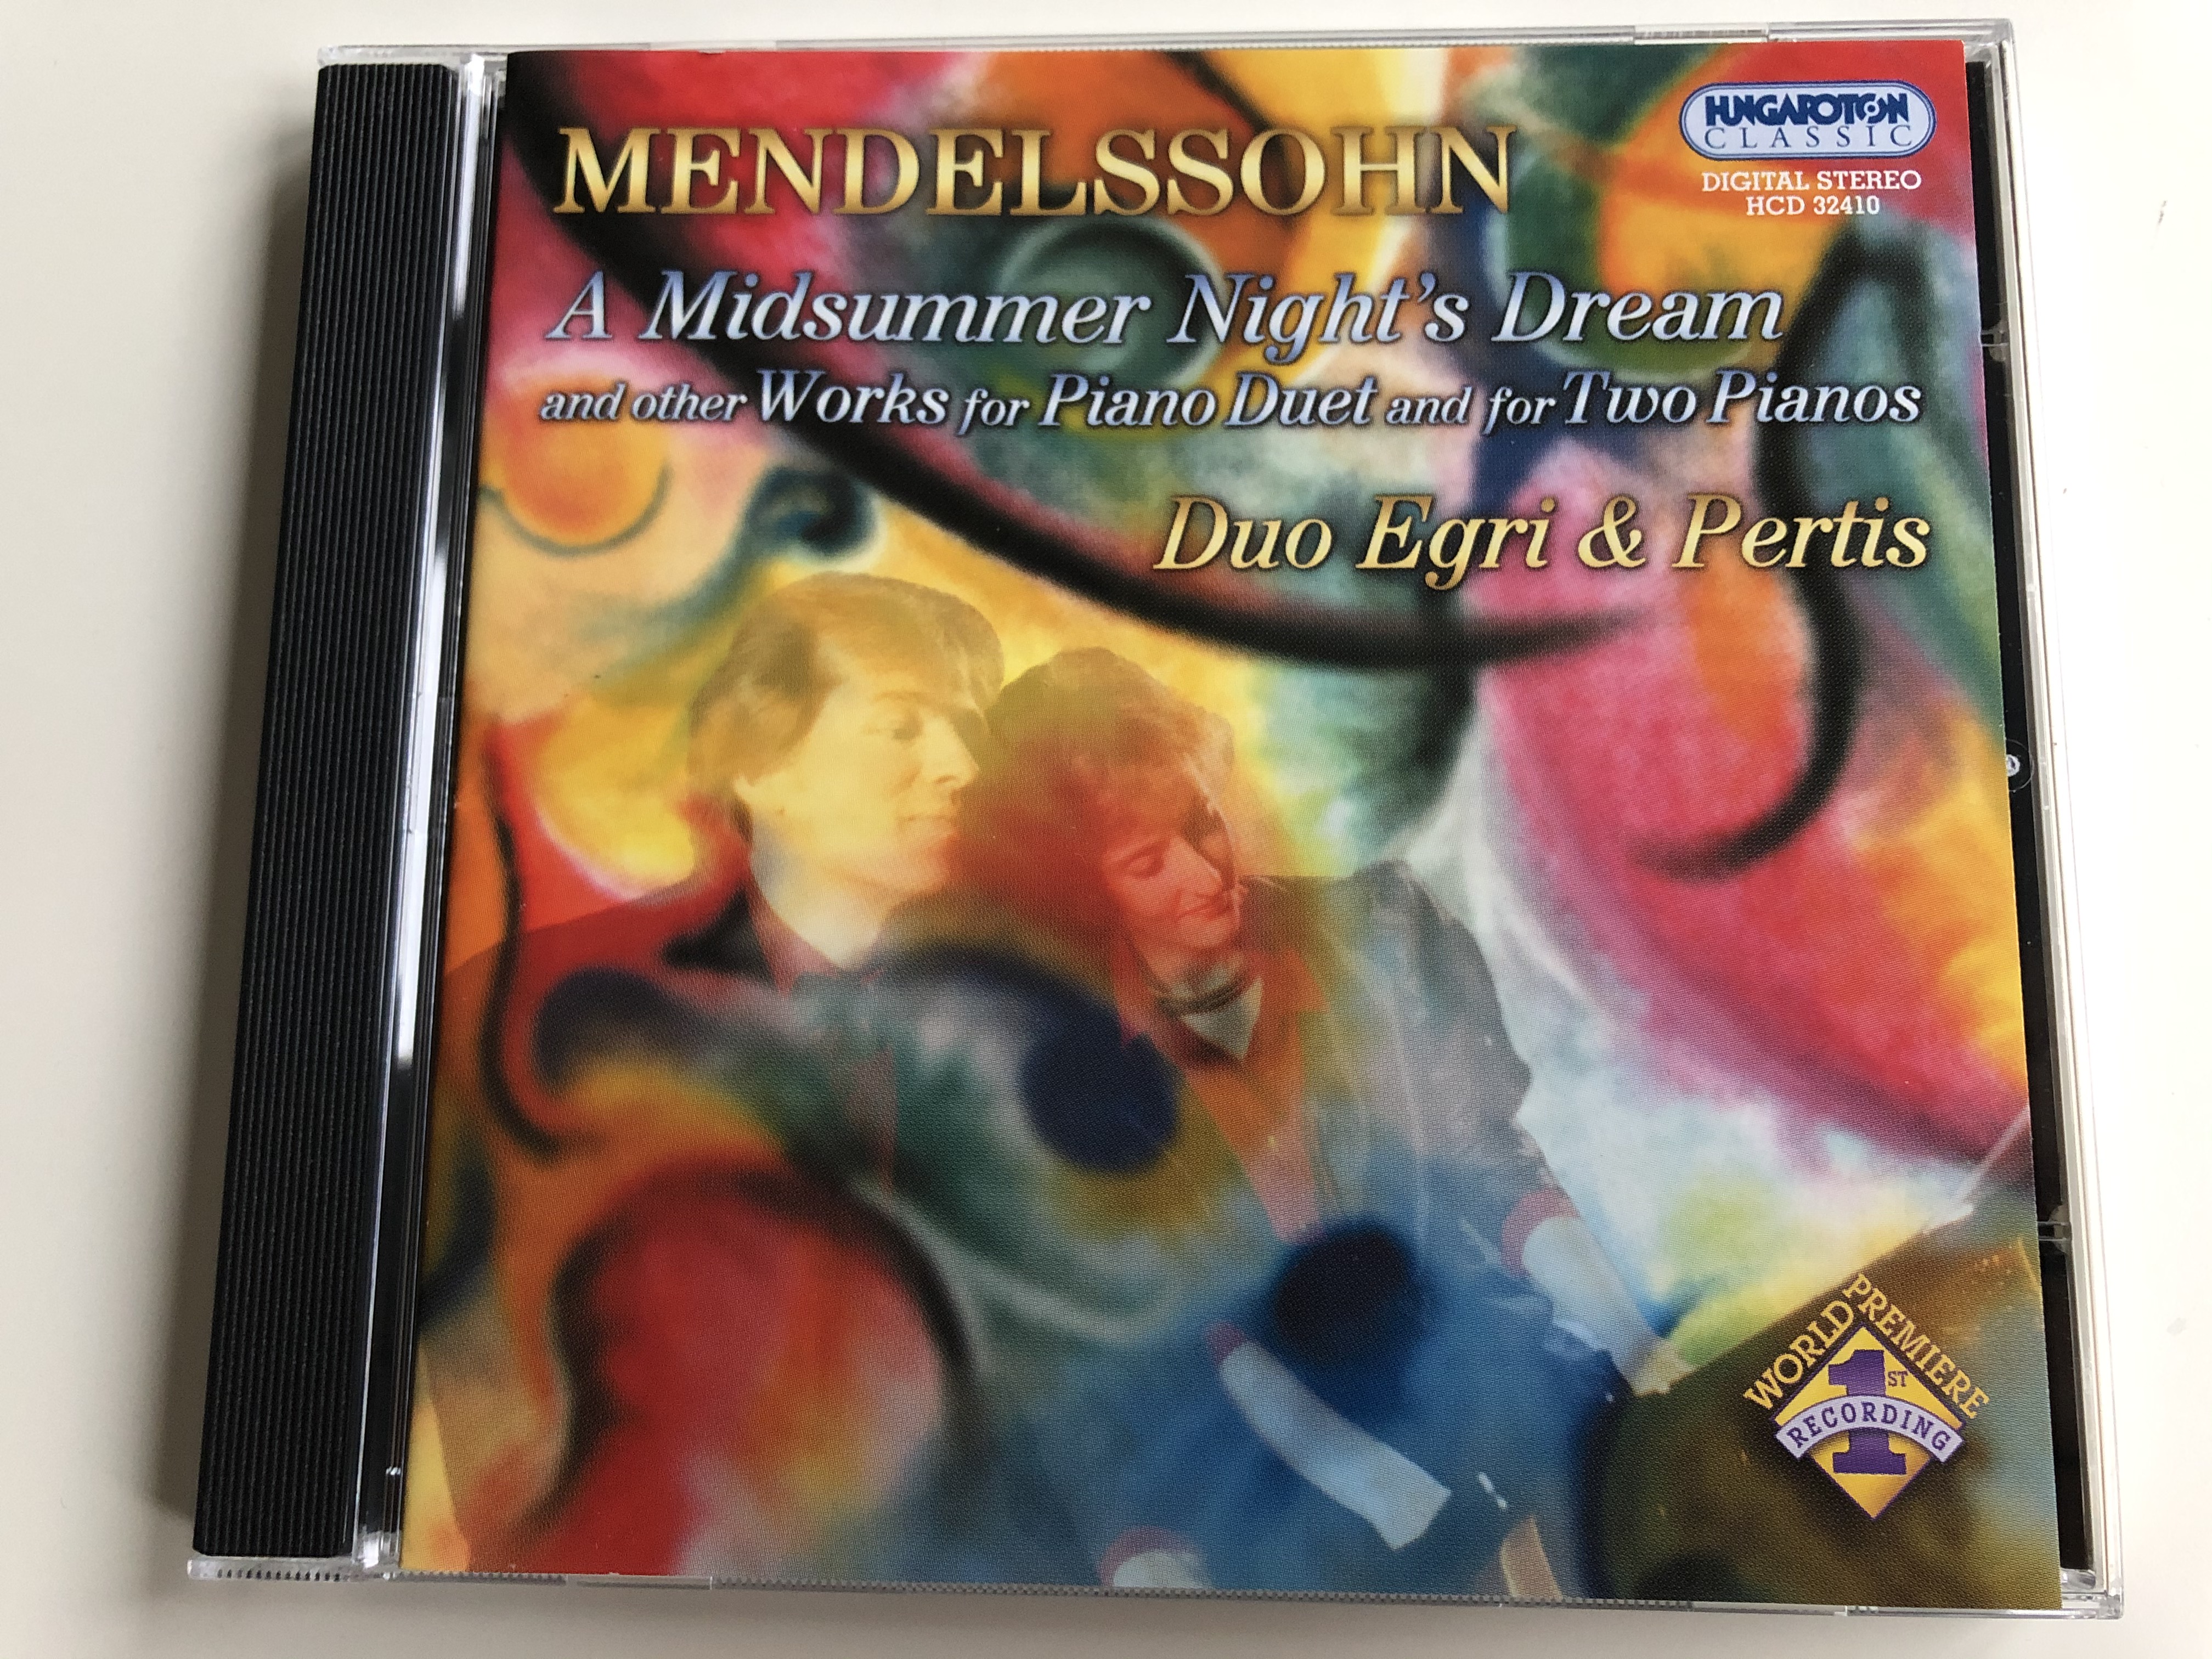 mendelssohn-a-midsummer-night-s-dream-and-other-works-for-piano-duet-and-for-two-pianos-duo-egri-pertis-hungaroton-classic-audio-cd-2006-stereo-hcd-32410-1-.jpg